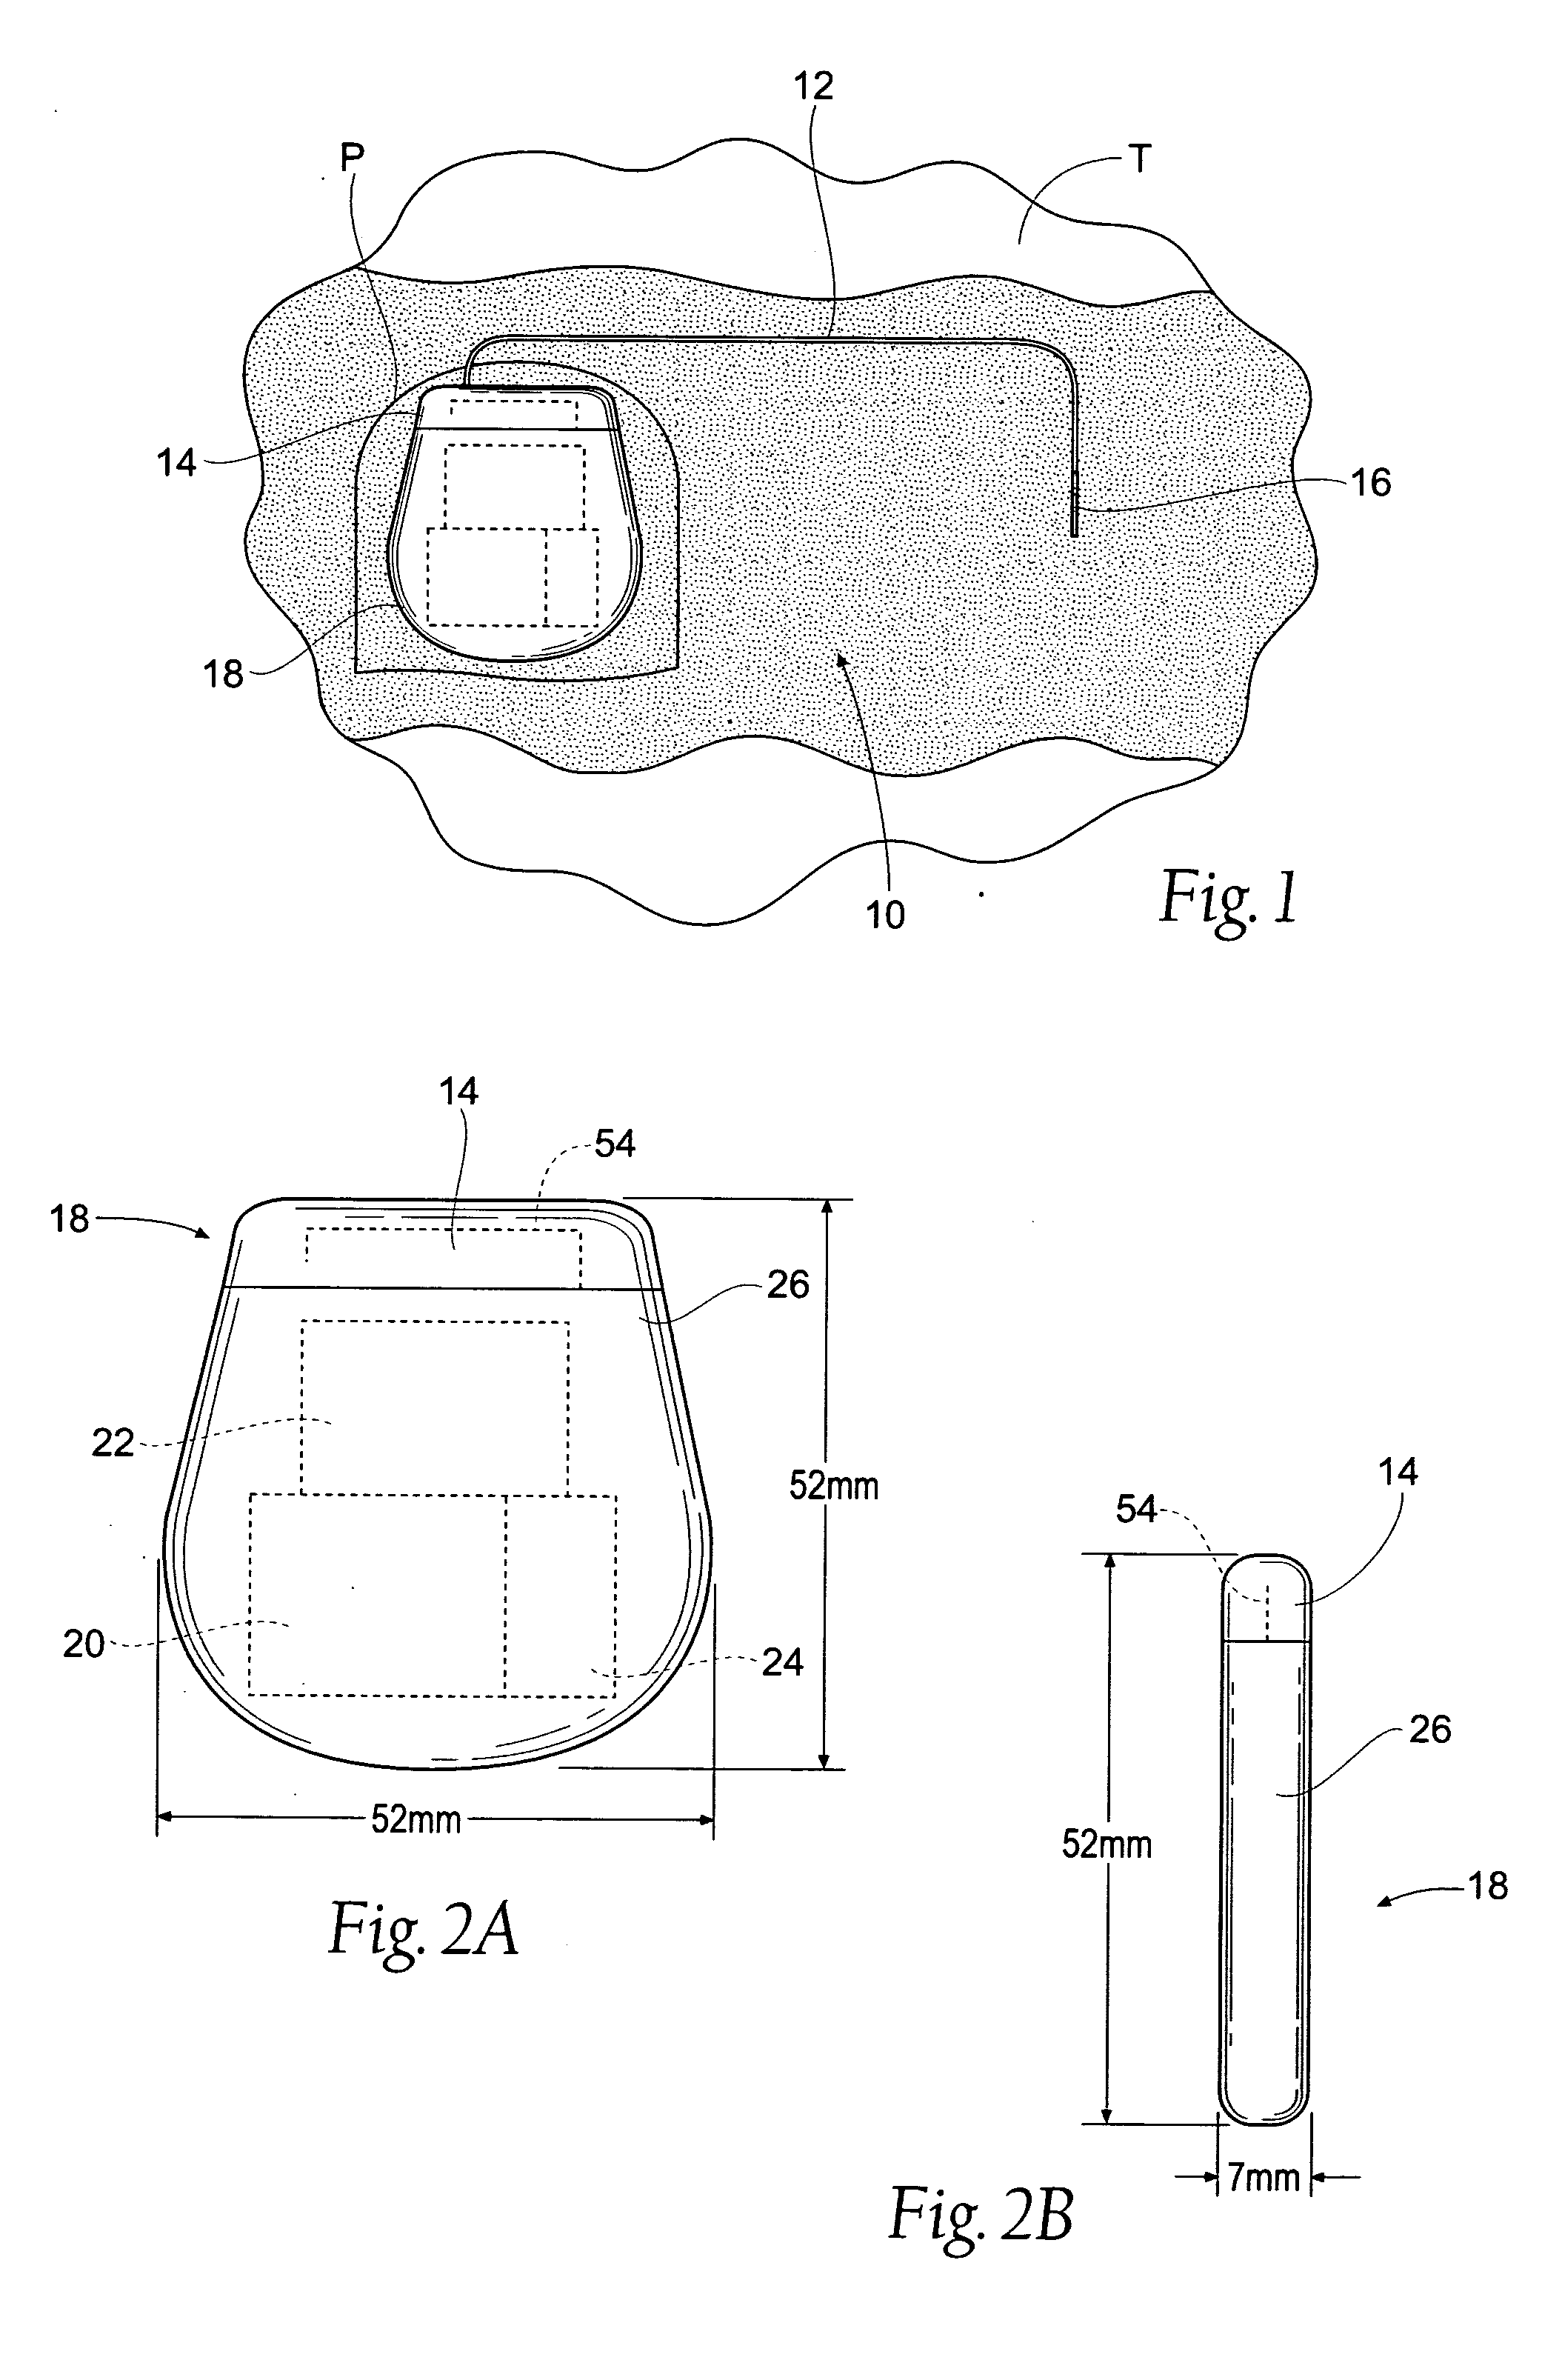 Implantable pulse generator for providing functional and/or therapeutic stimulation of muscles and/or nerves and/or central nervous system tissue